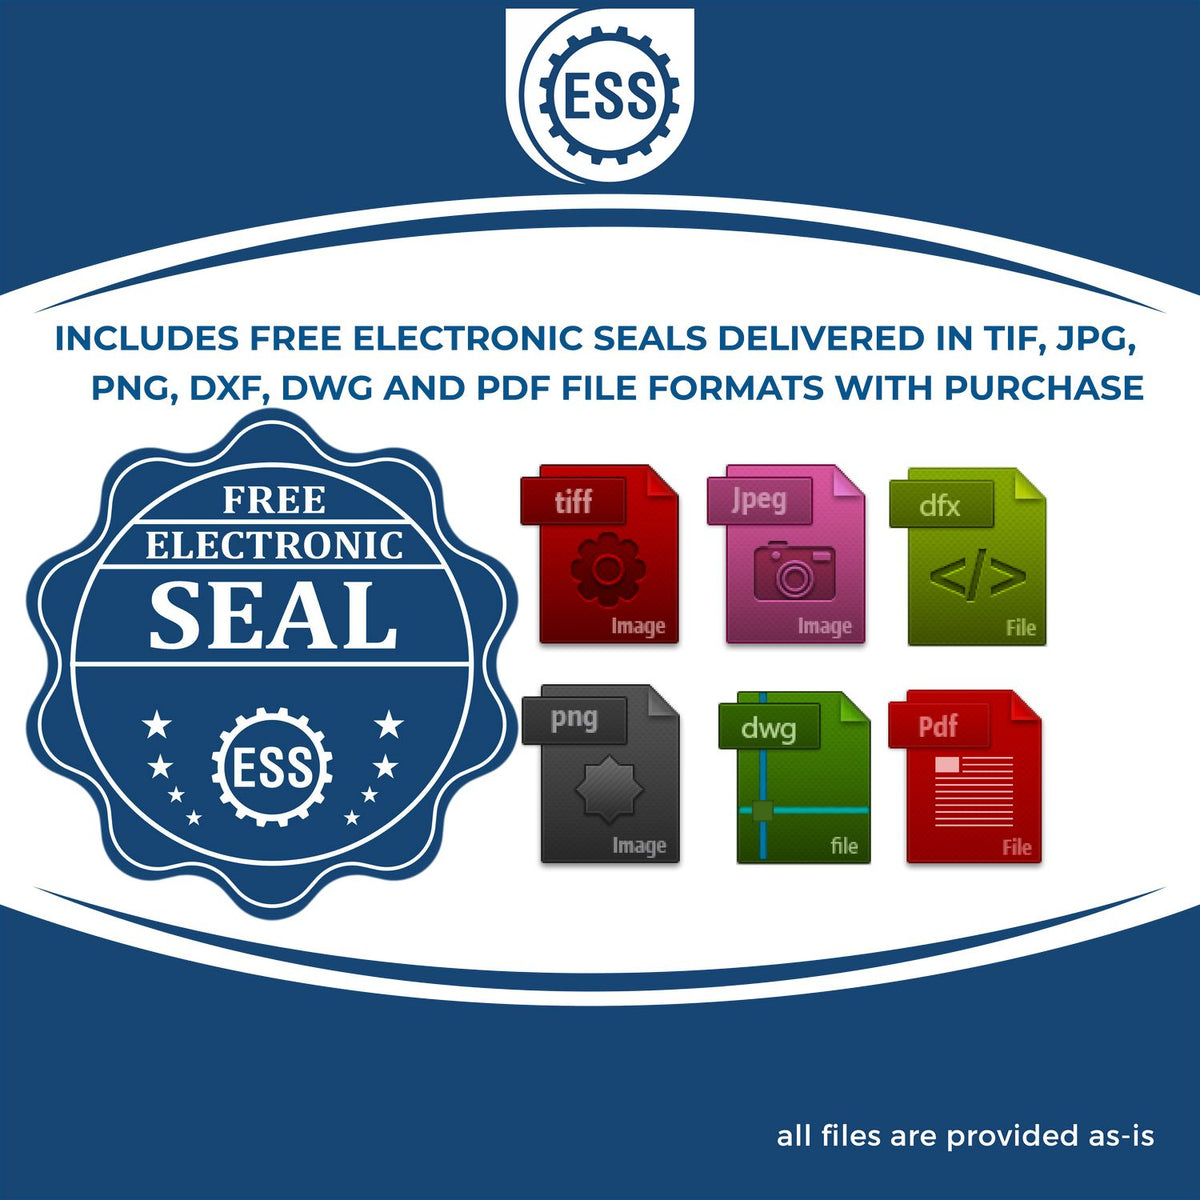 An infographic for the free electronic seal for the Long Reach Montana Geology Seal illustrating the different file type icons such as DXF, DWG, TIF, JPG and PNG.